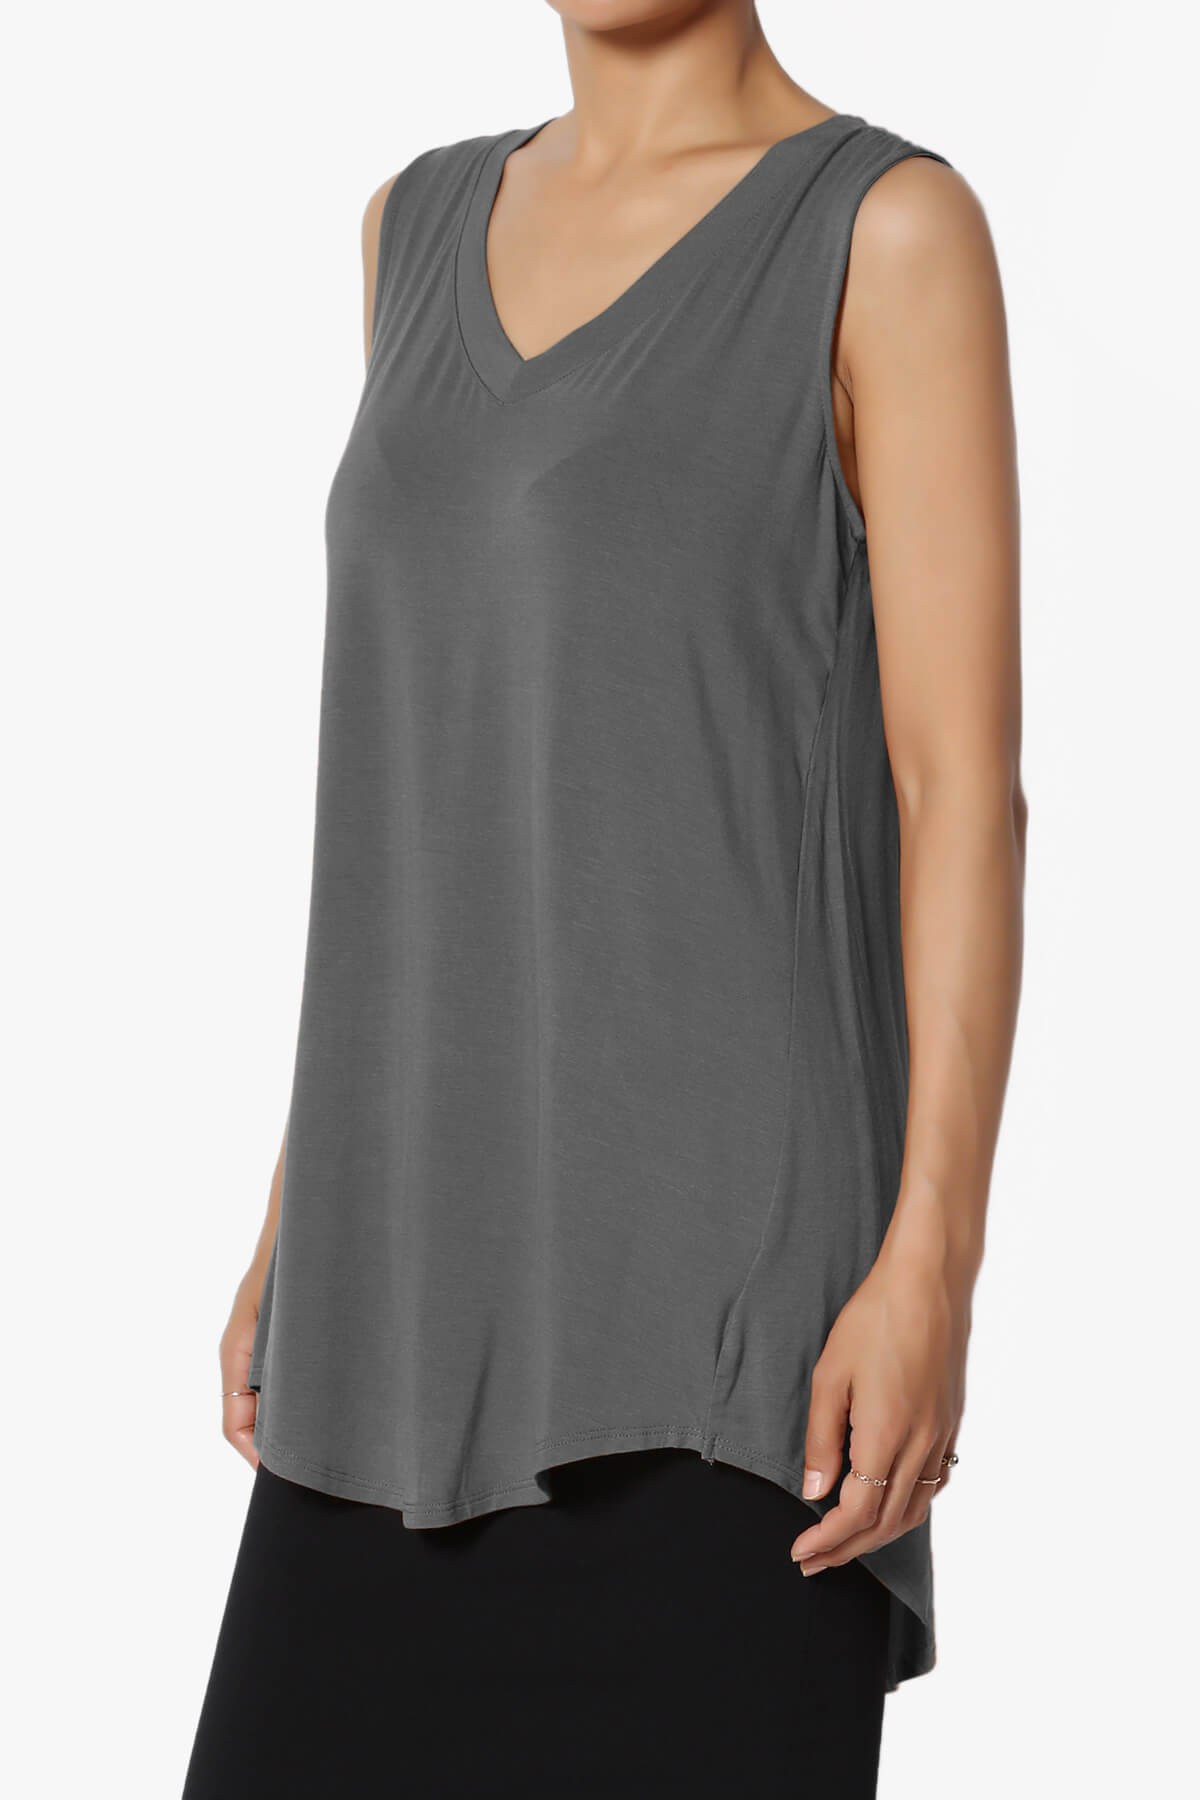 Load image into Gallery viewer, Myles Sleeveless V-Neck Luxe Jersey Top ASH GREY_3
